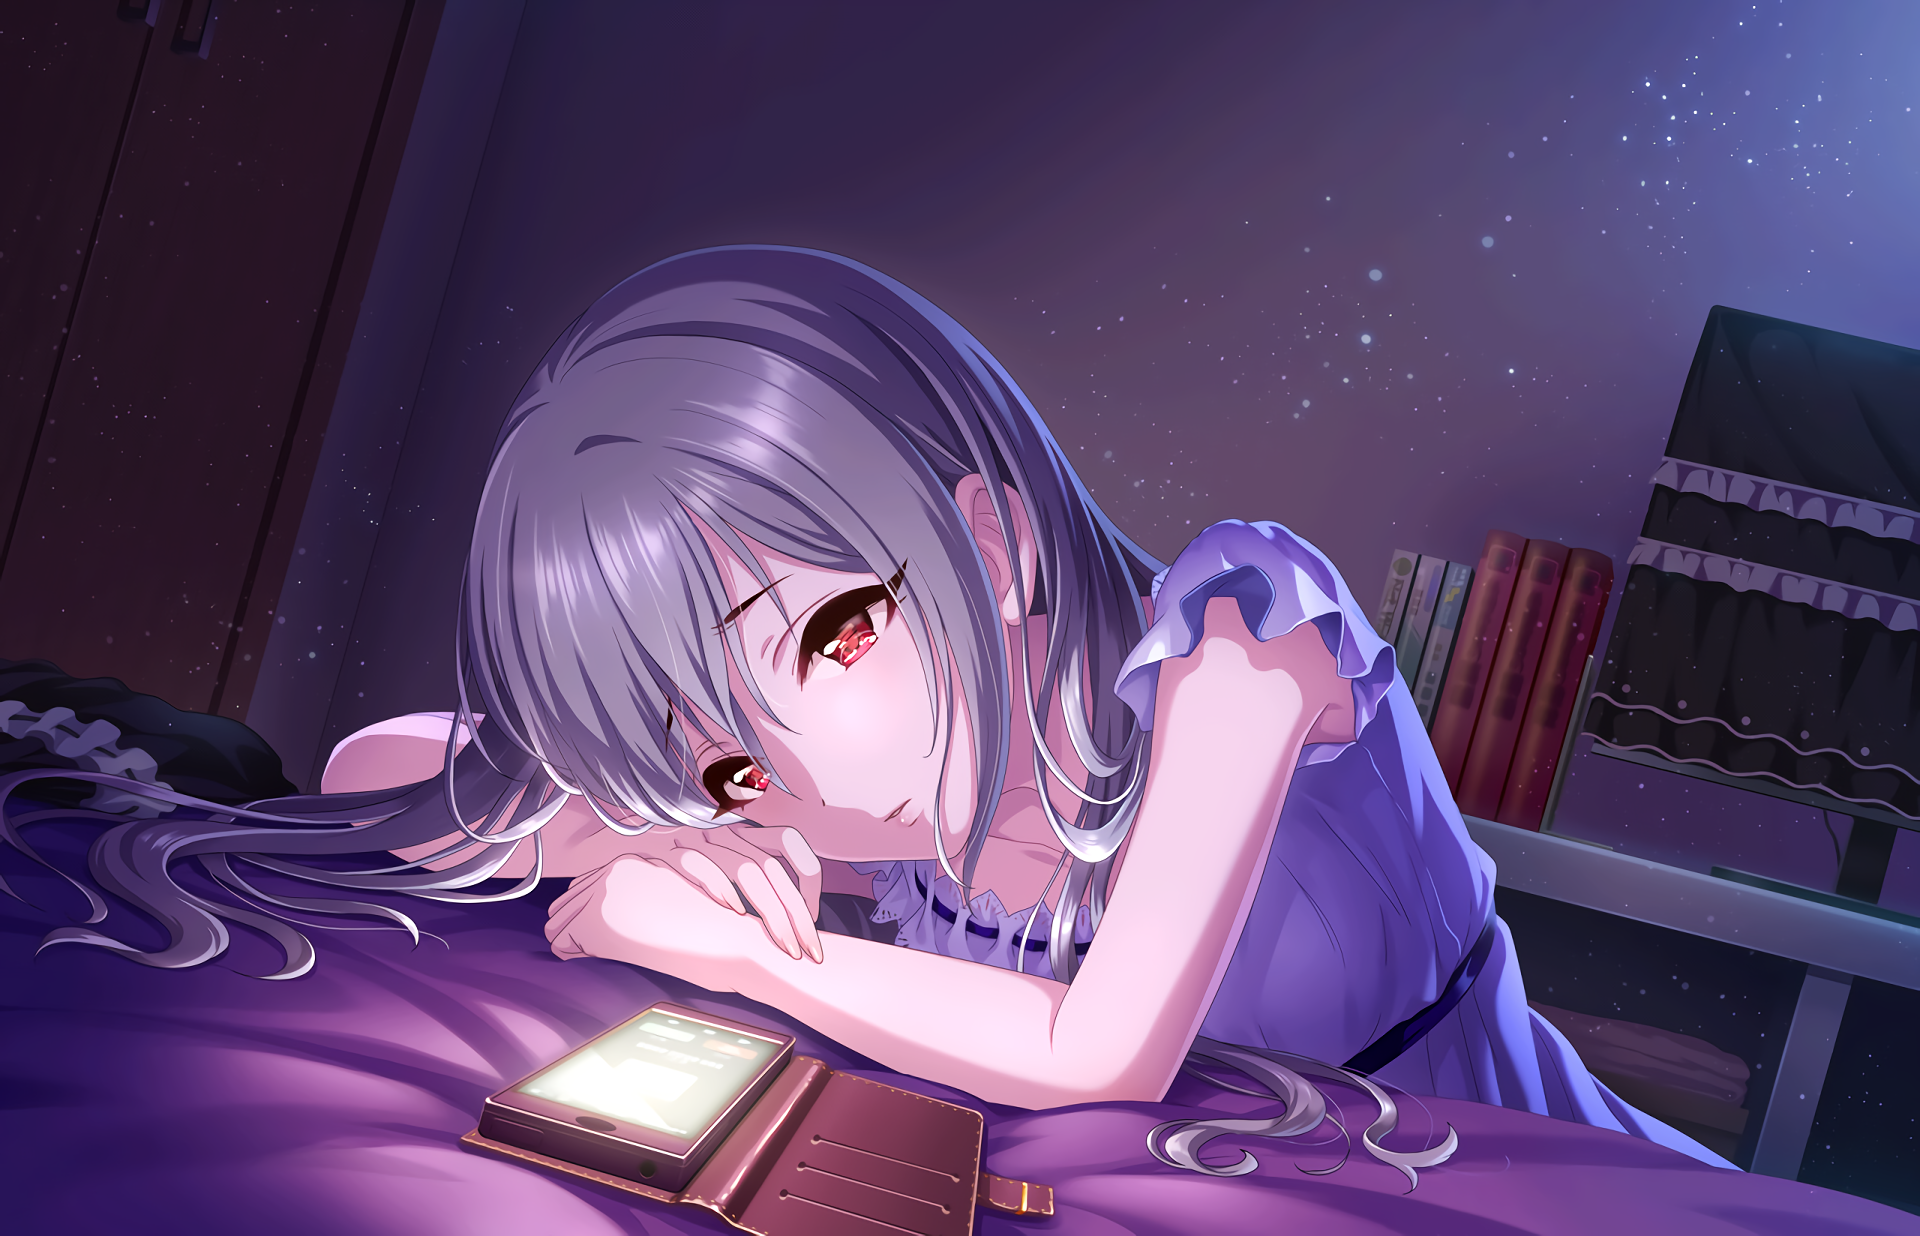 THE IDOLM STER Cinderella Girls Kanzaki Ranko Phone Bed Bedroom Anime Girls THE IDOLM STER 1920x1236